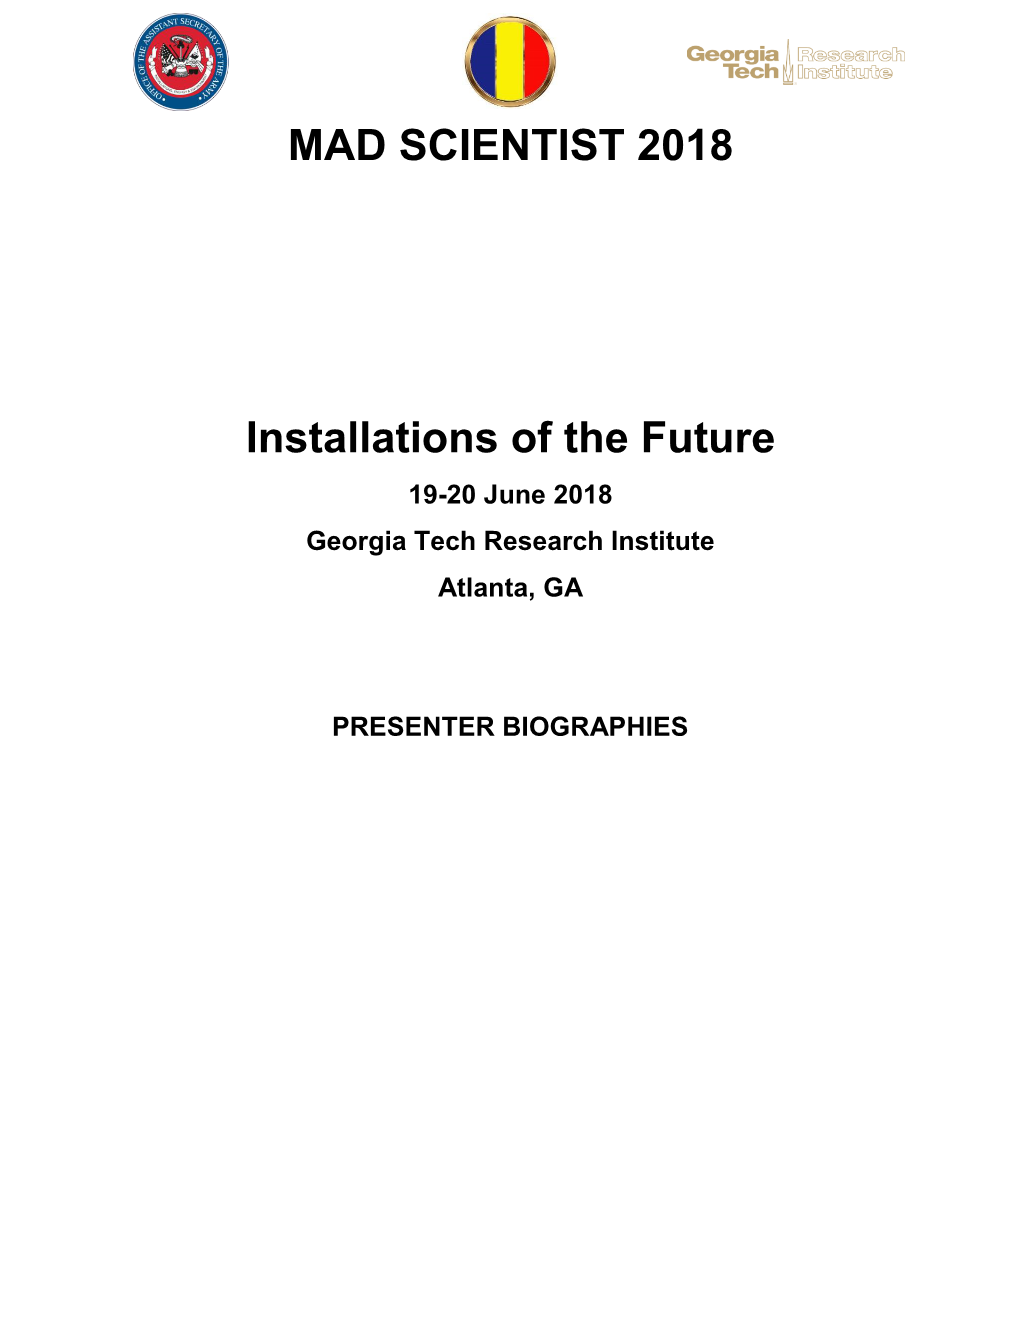 MAD SCIENTIST 2018 Installations of the Future